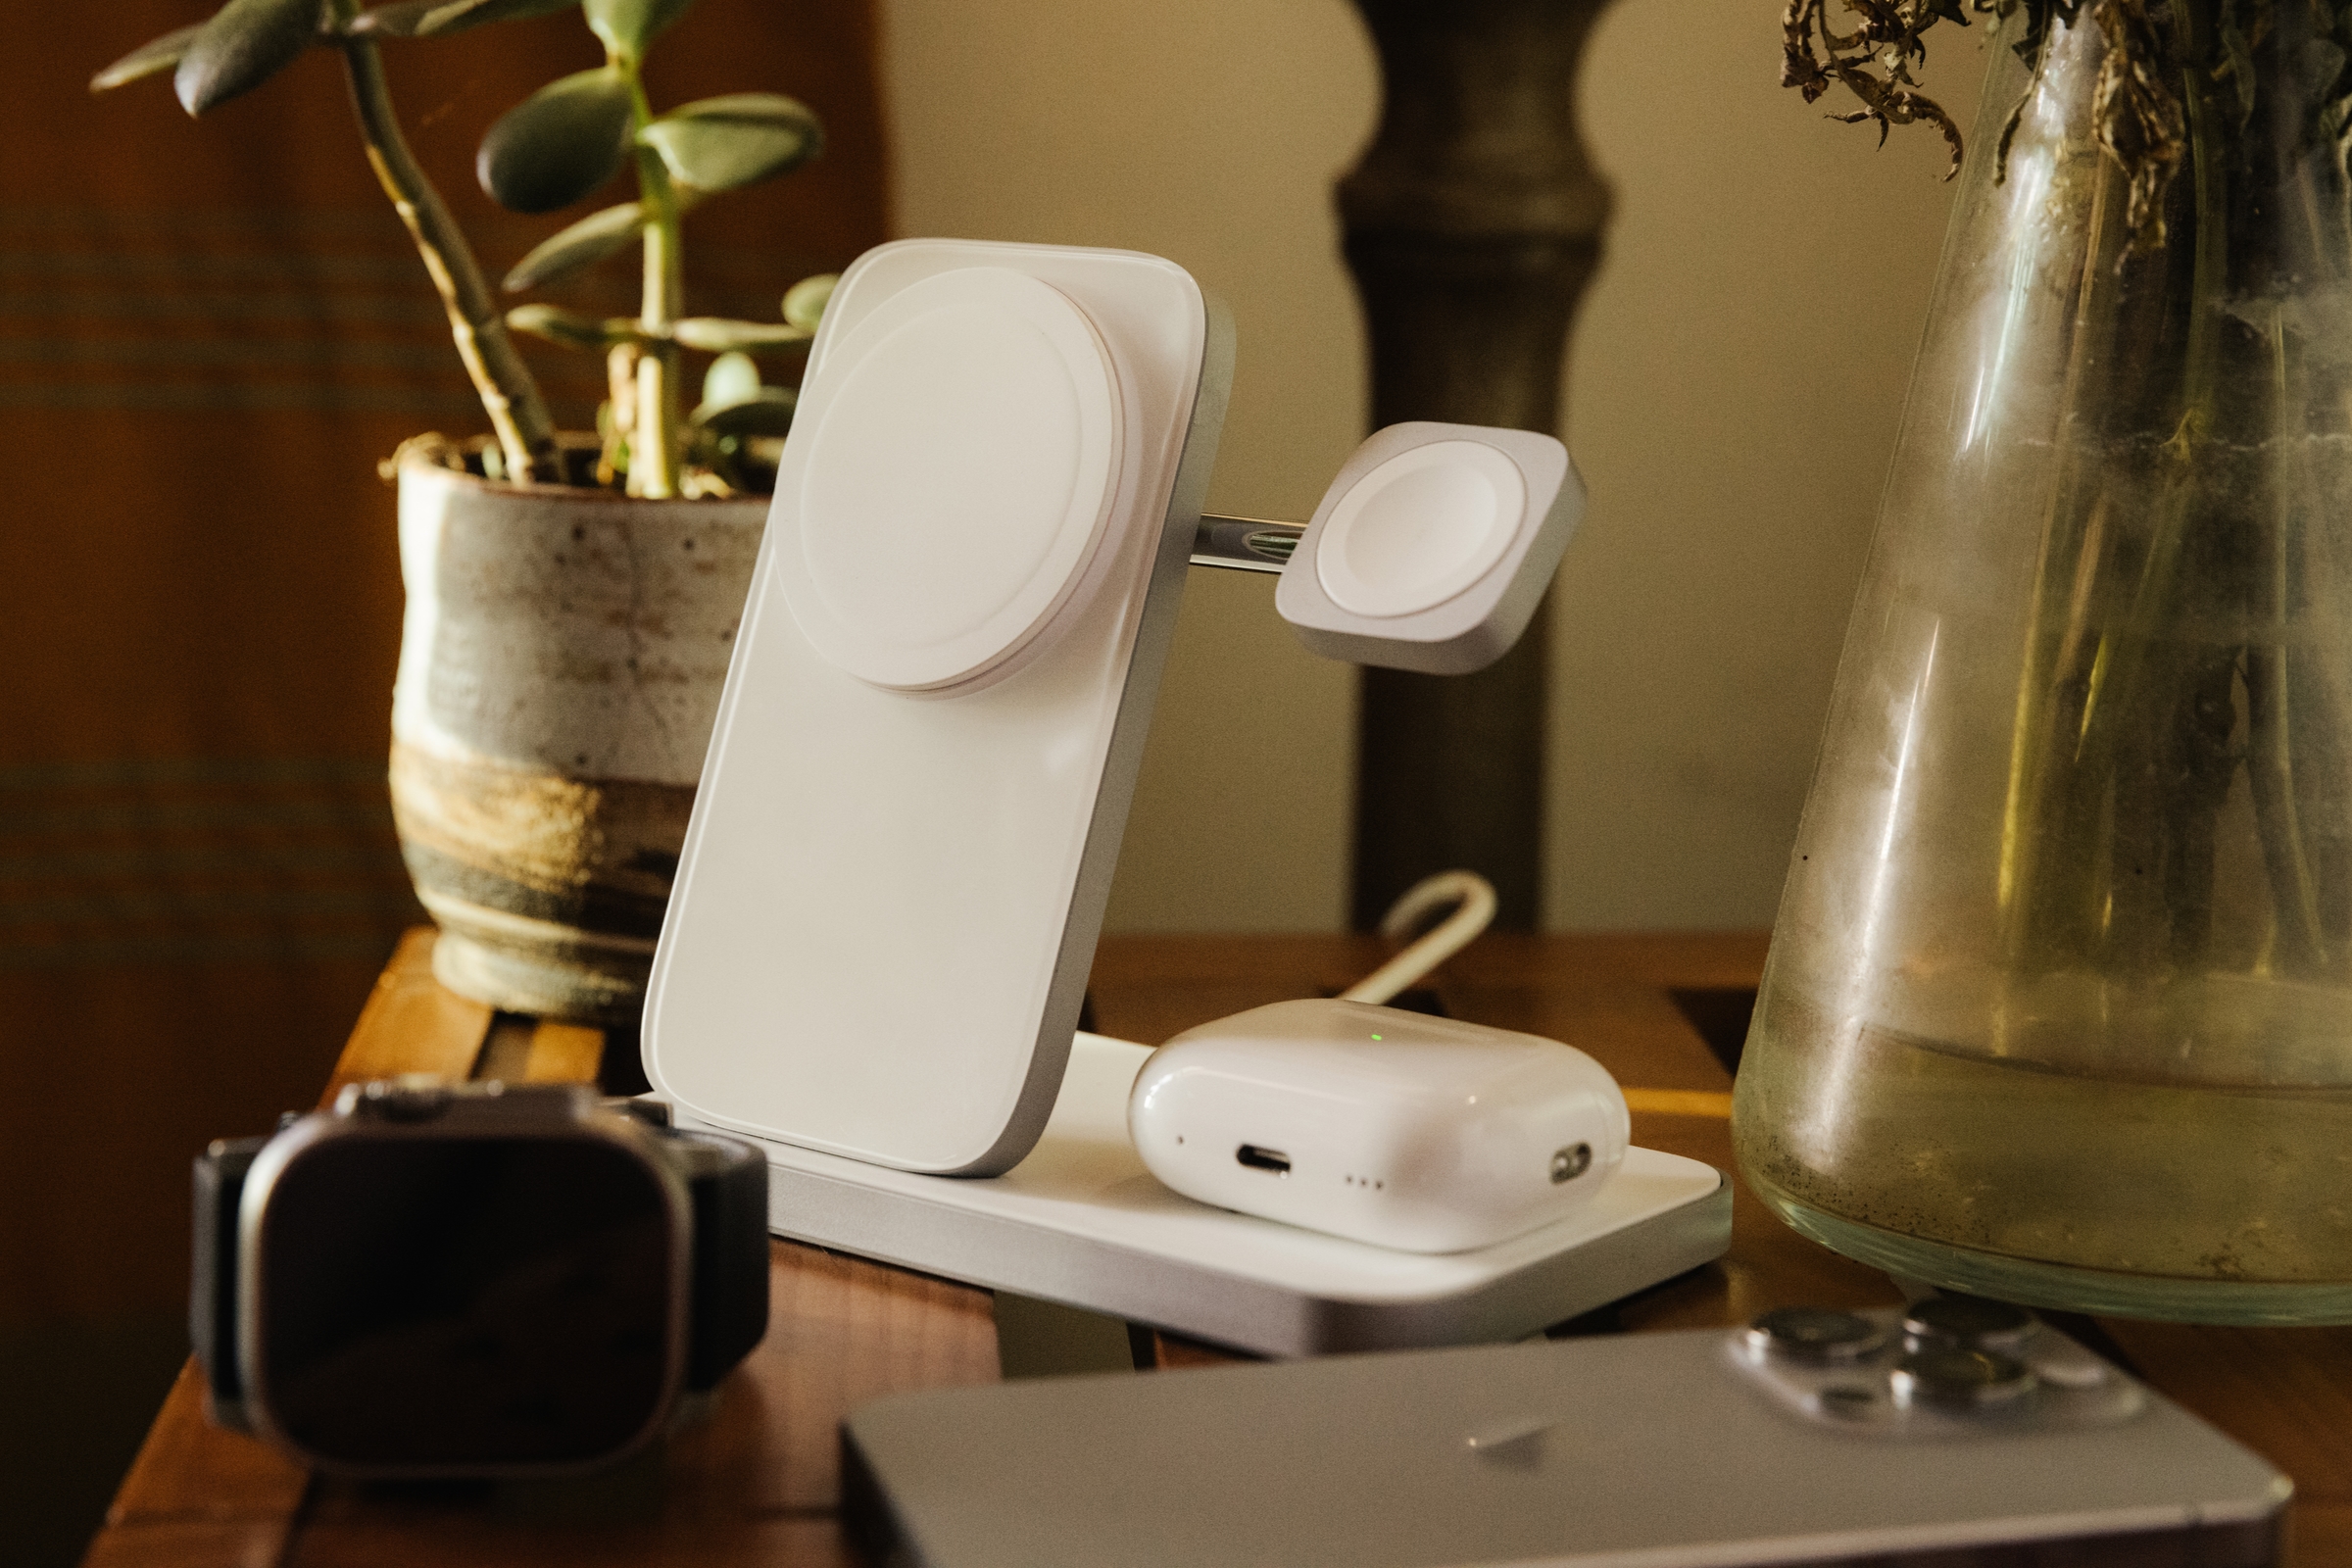 Silver Nomad Stand One Max iPhone charging stand on table with AirPods Pro, iPhone, and Apple Watch lying in front.